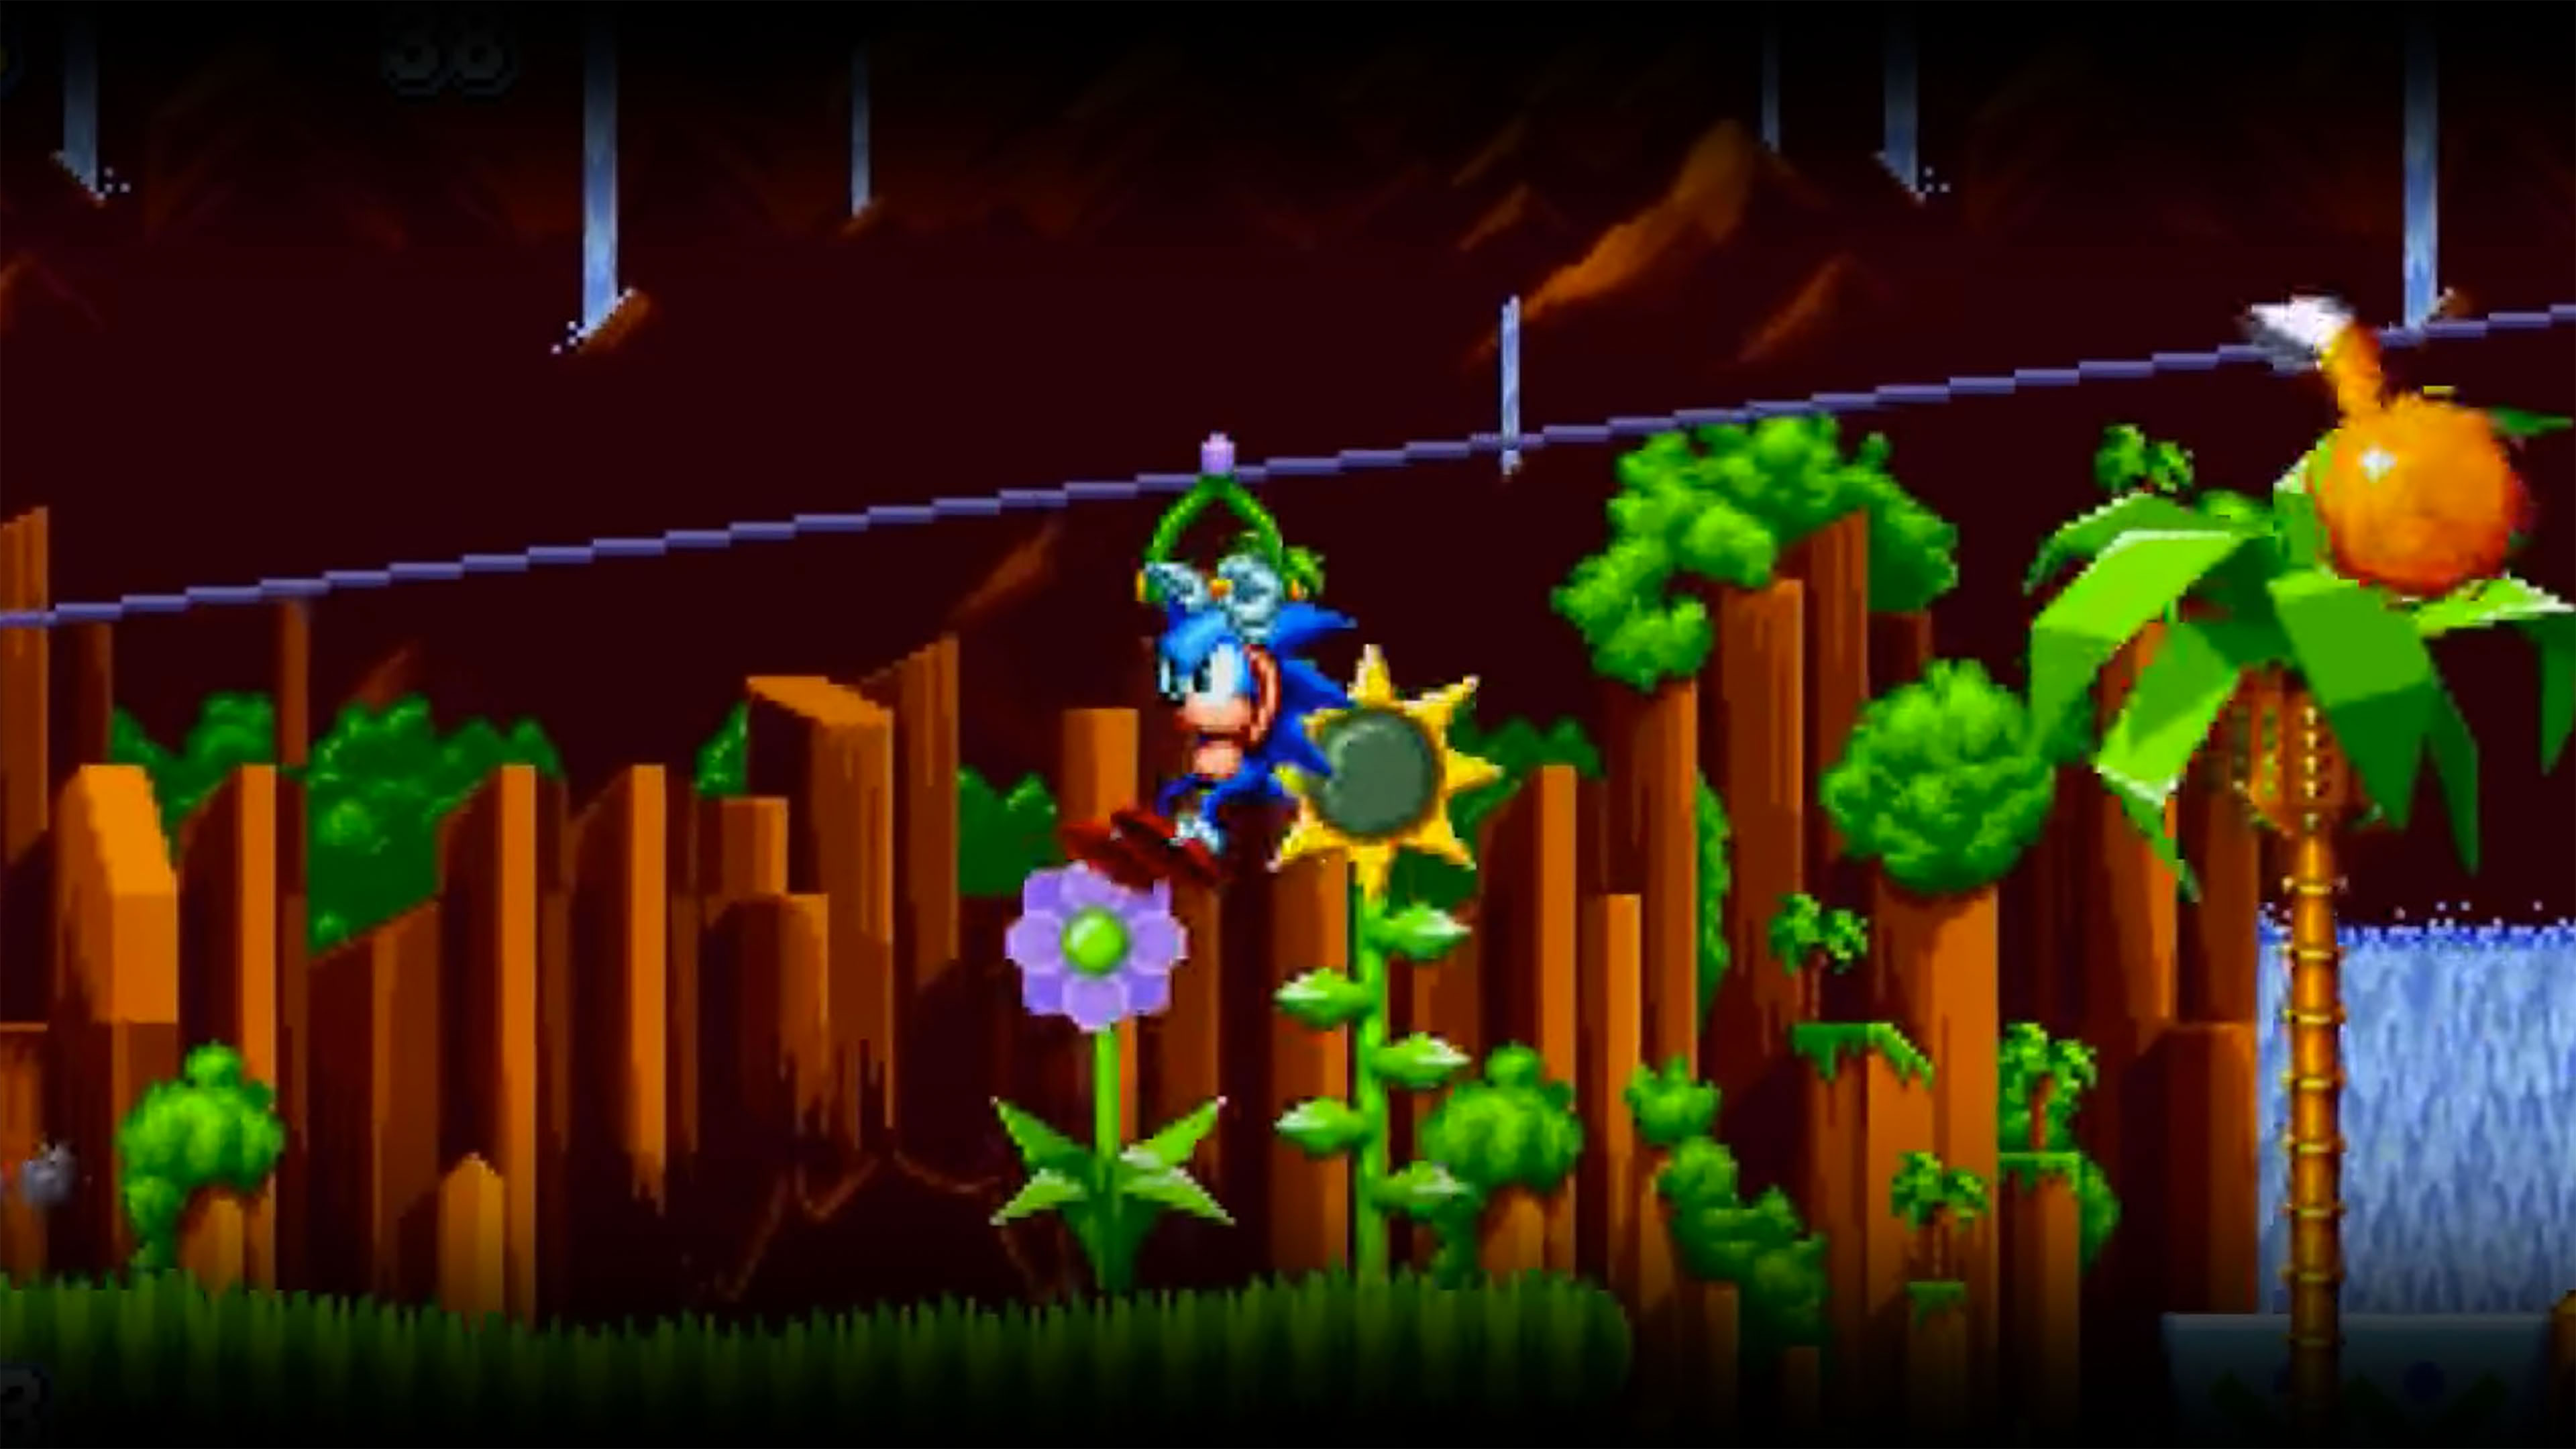 sonic mania download for free